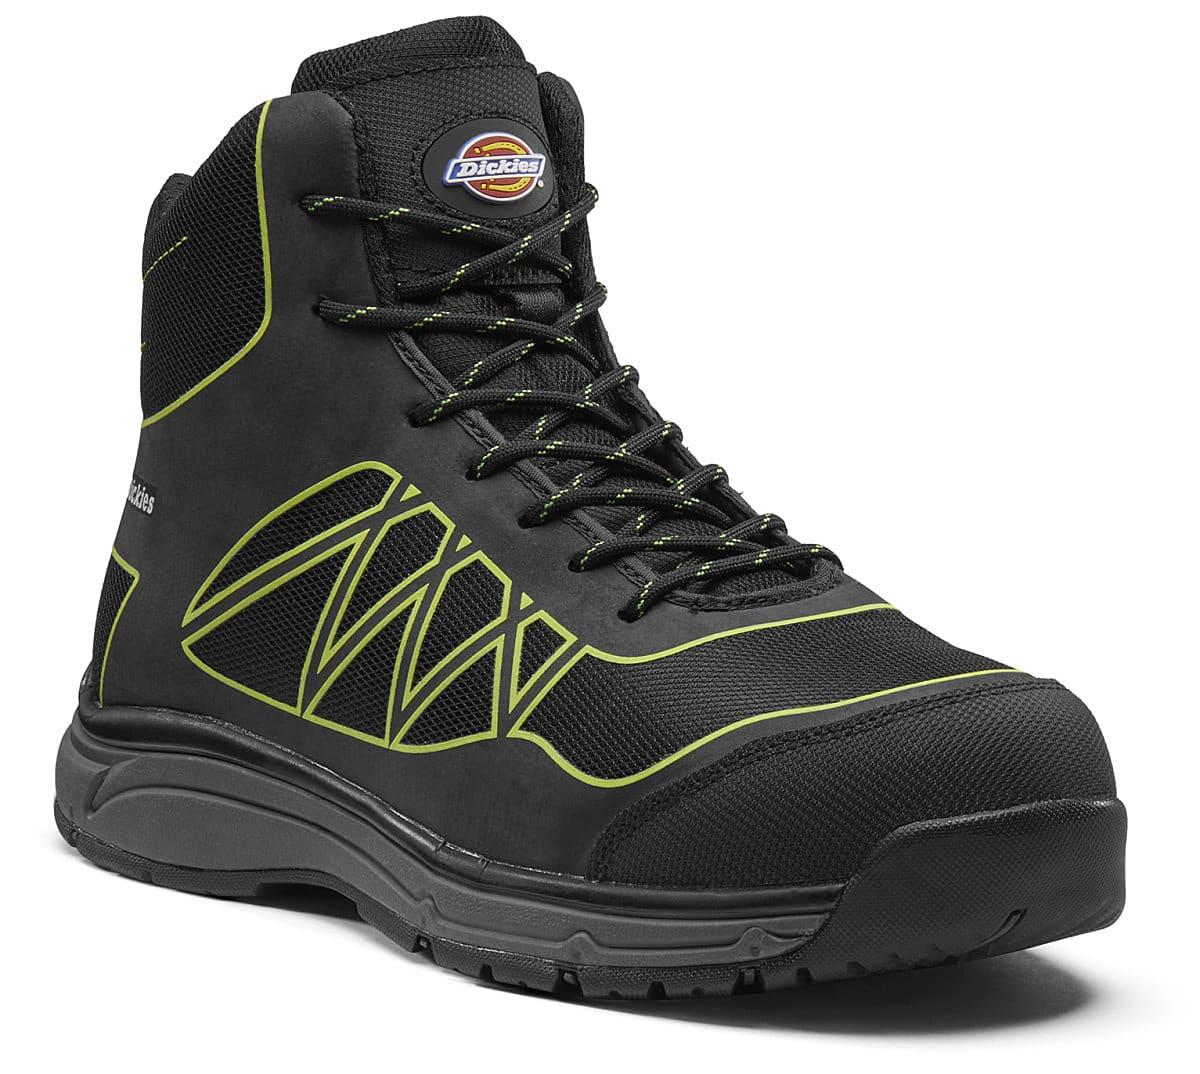 Dickies Phoenix Safety Boots in Black / Lime Green (Product Code: FC9526)